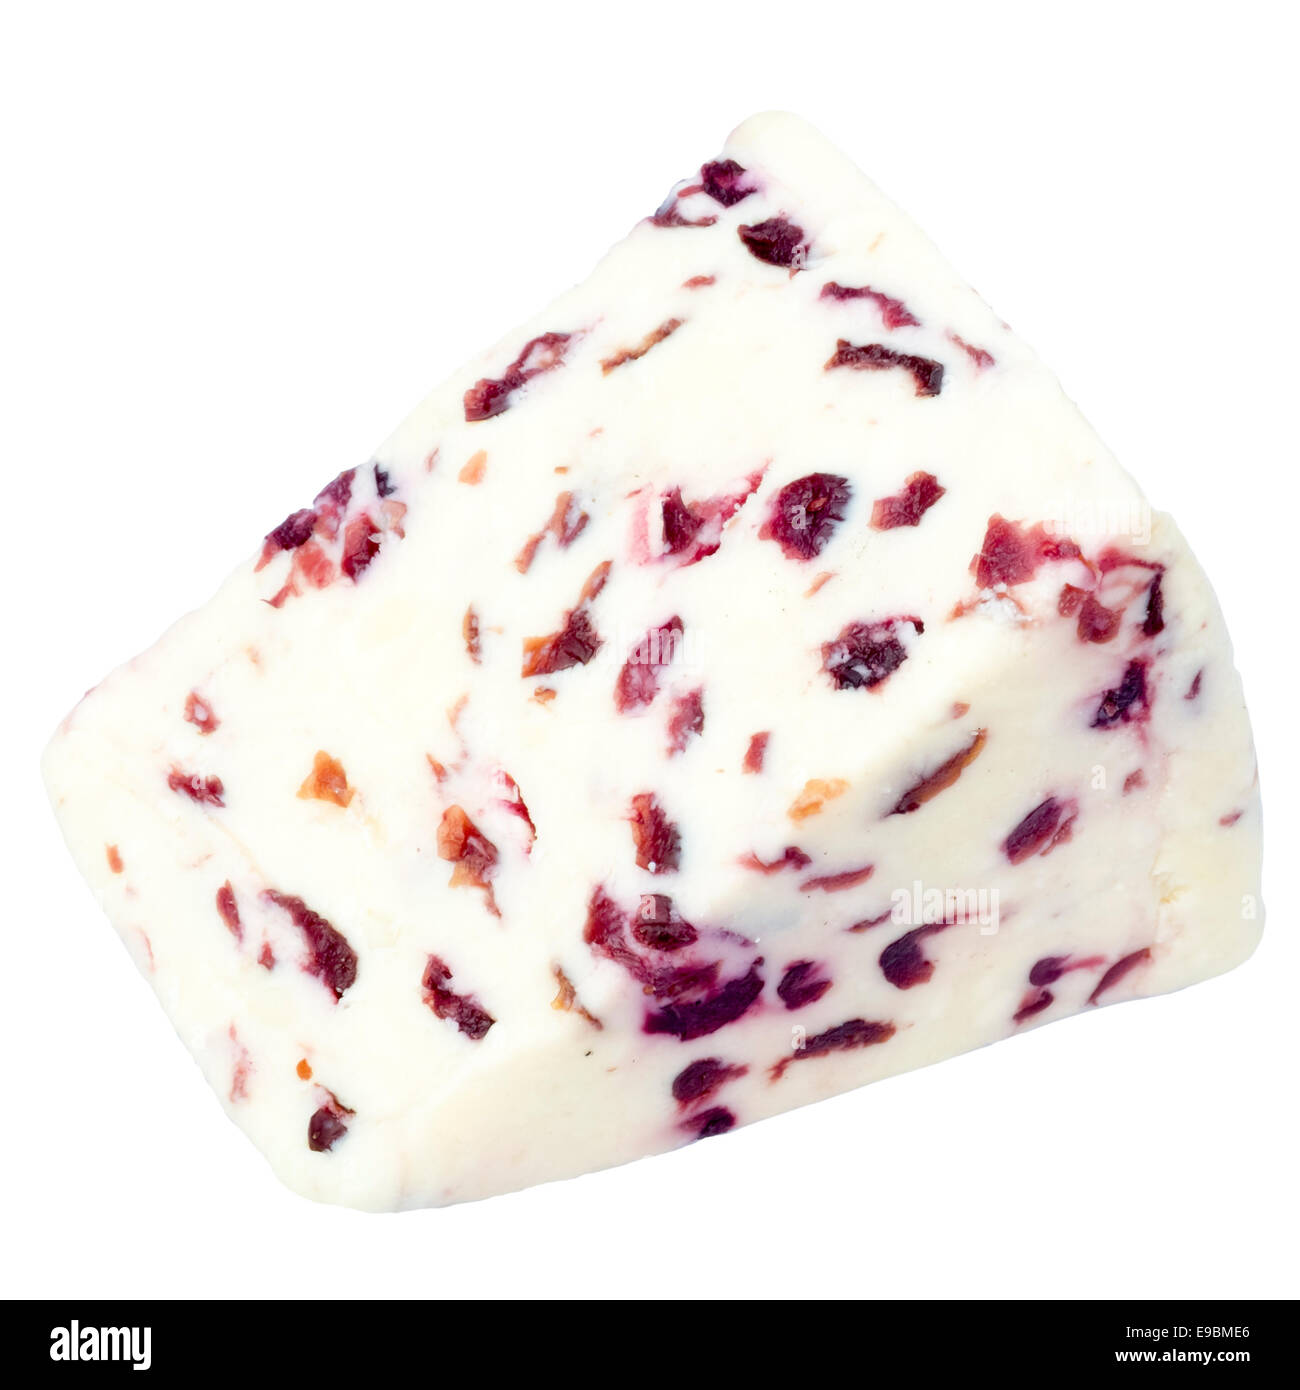 Wensleydale cheese and cranberries, cut out or isolated against a white background. Stock Photo